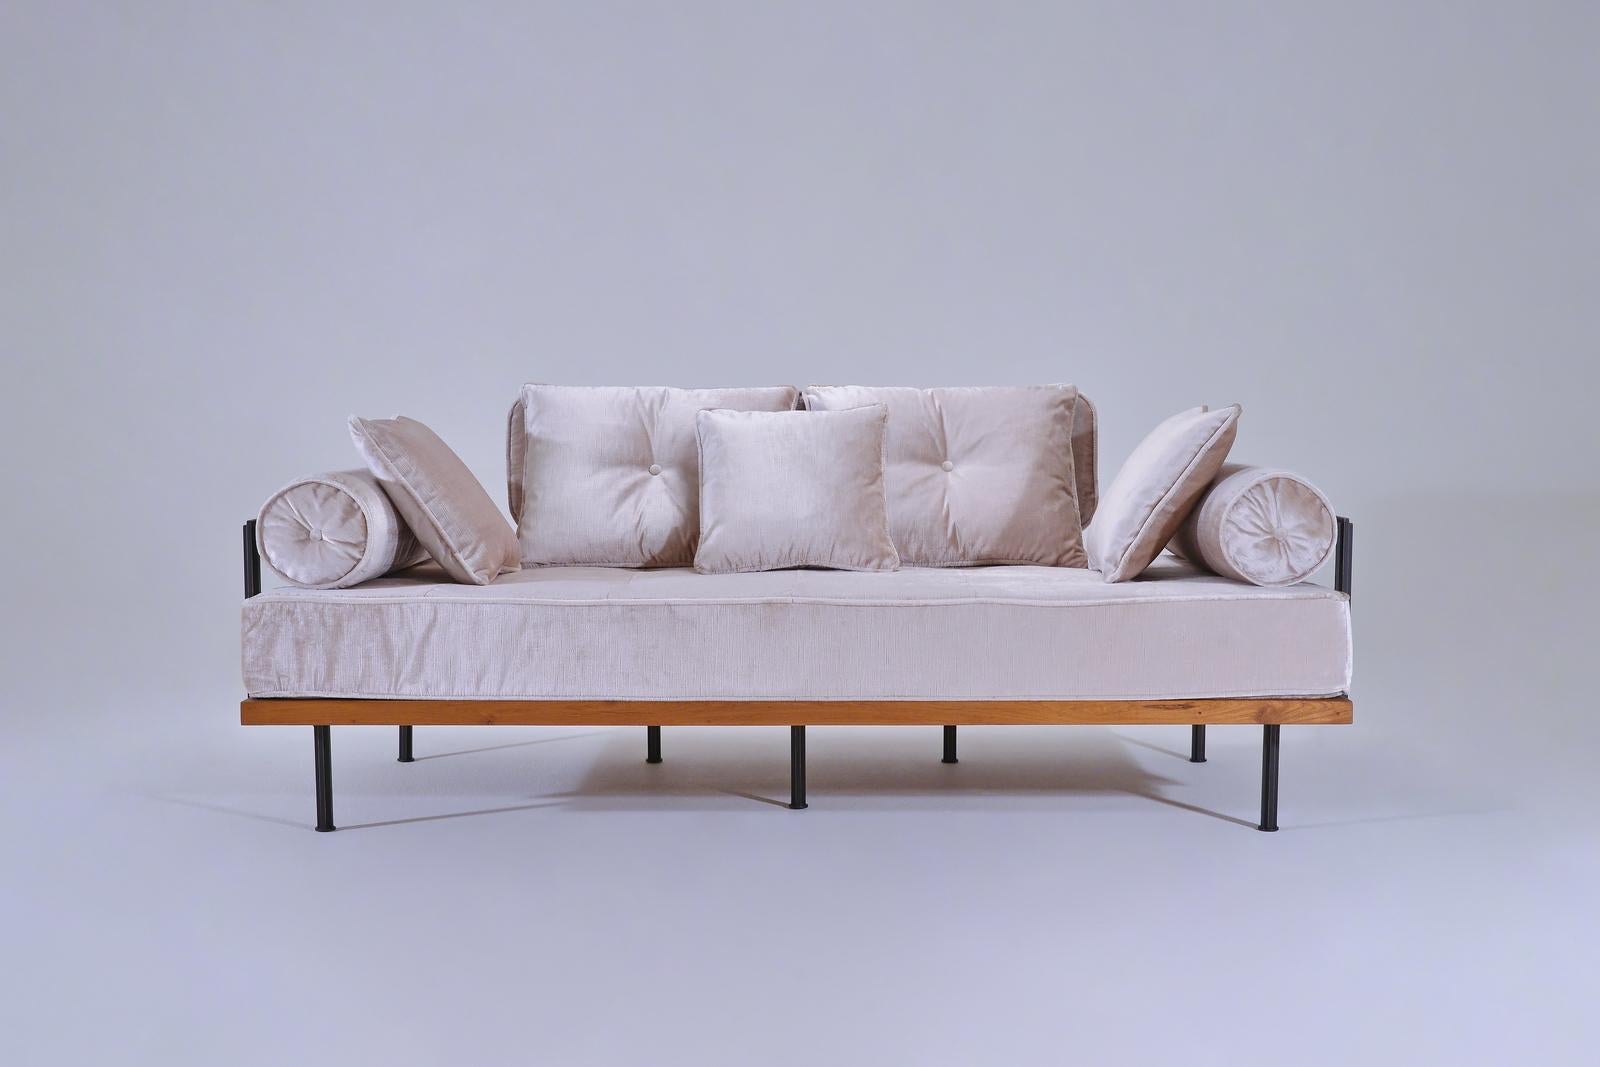 Model: PT71-BS3-TE-DO two-seat sofa
Frame: Reclaimed hardwood
Frame finish: Diamond oil
Structure: Extruded and hand-welded solid brass rods
Structure finish: Brown brass
Seat material: 100% latex
Upholstery: included
Fabric: not included,